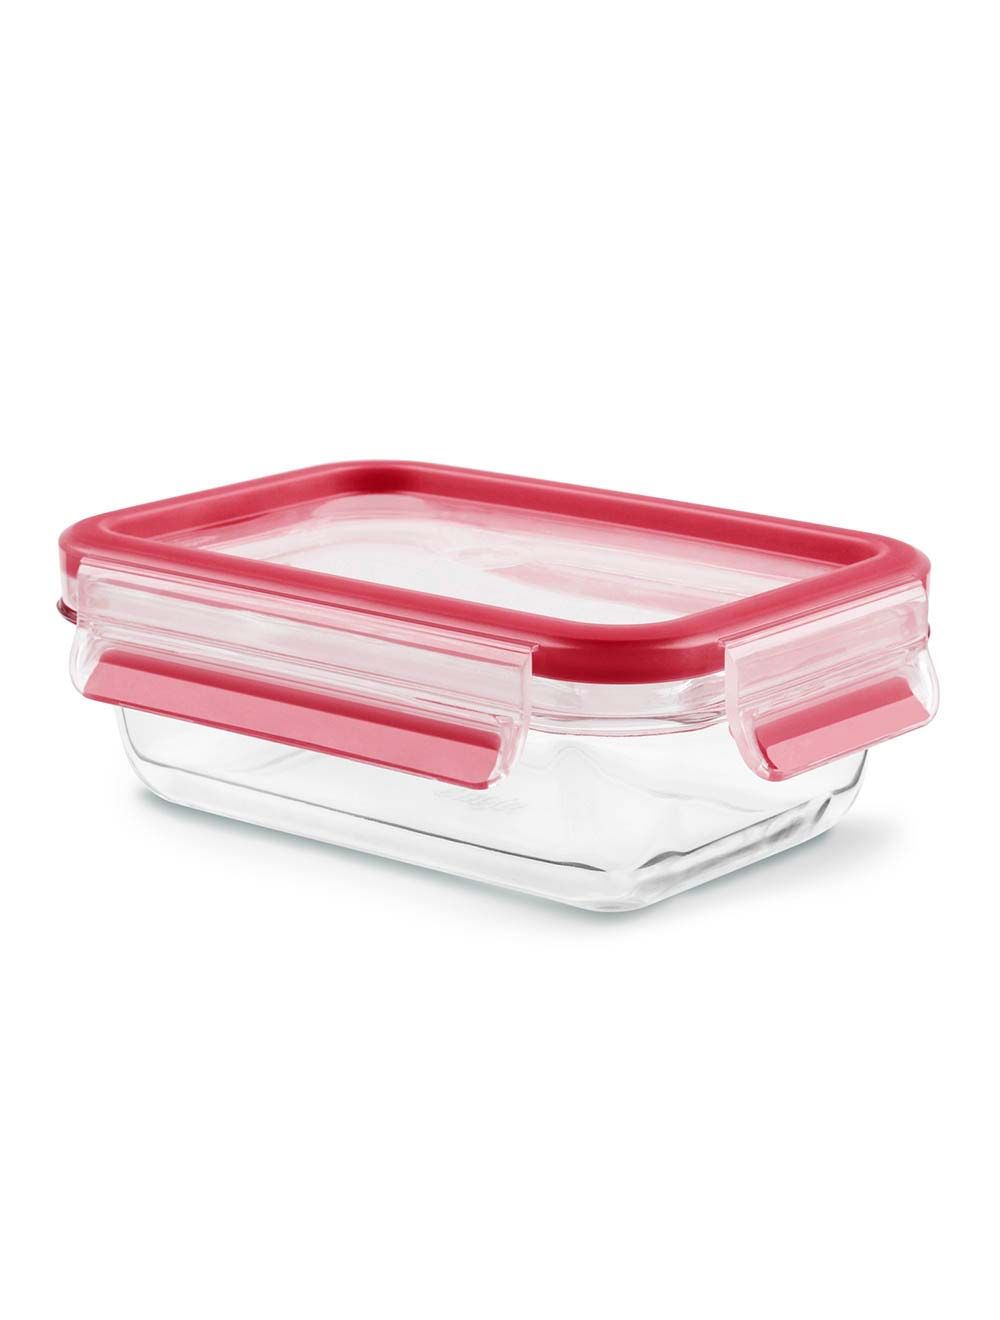 Tefal Masterseal 1.3 L Food Container,K3010412